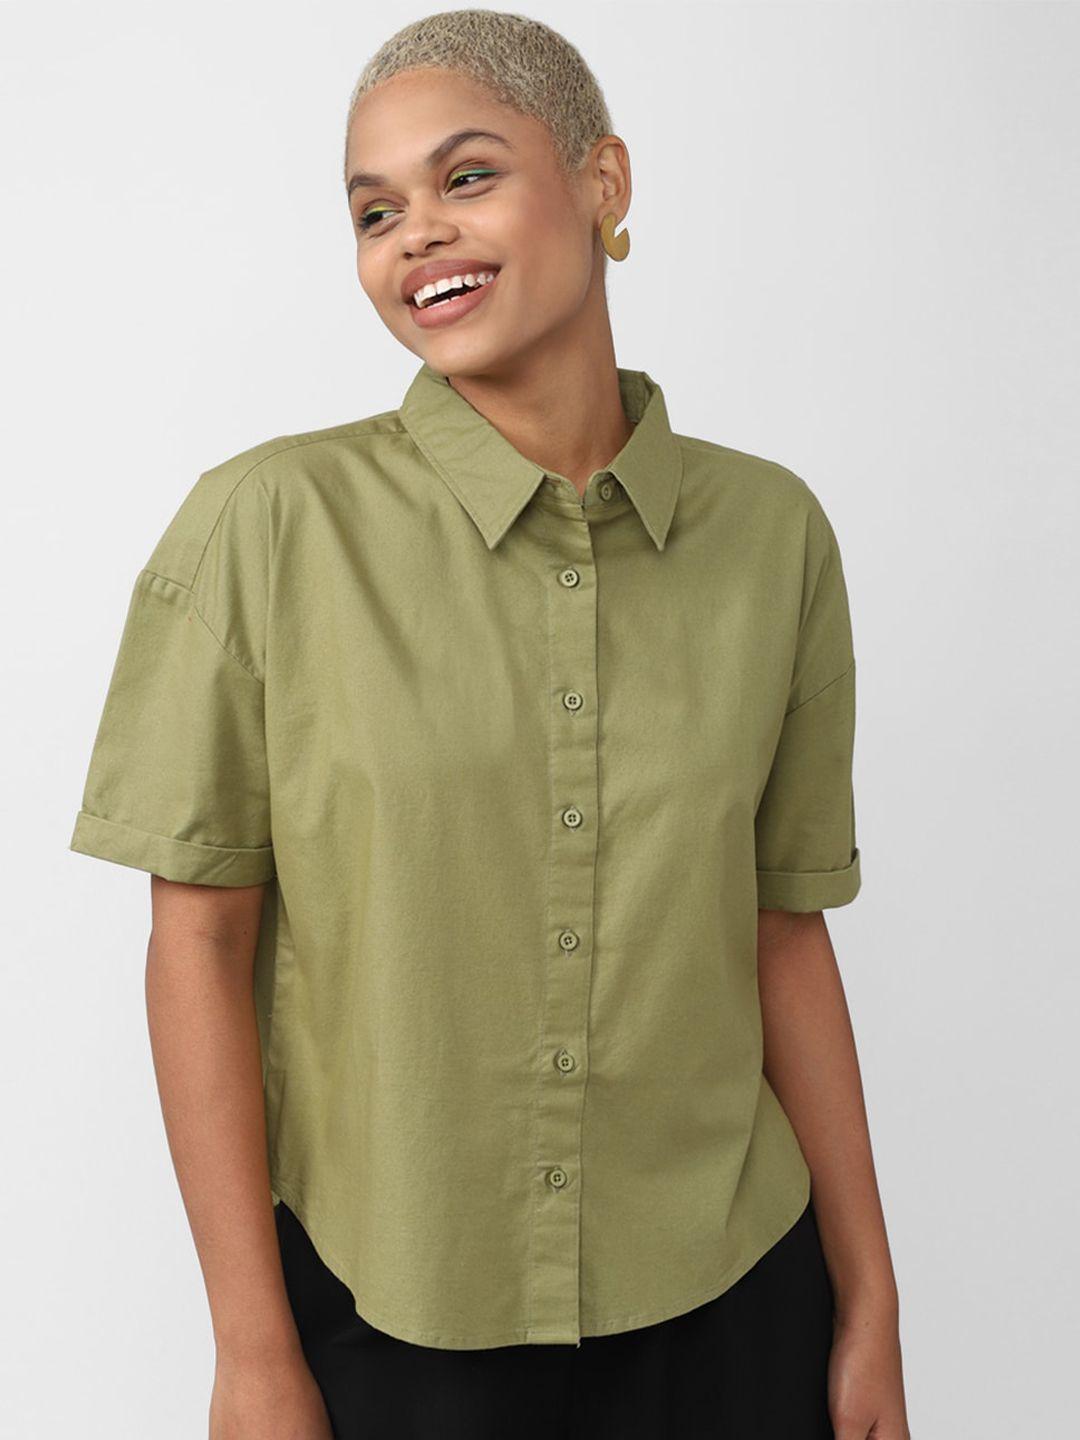 forever-21-roll-up-sleeves-shirt-style-top